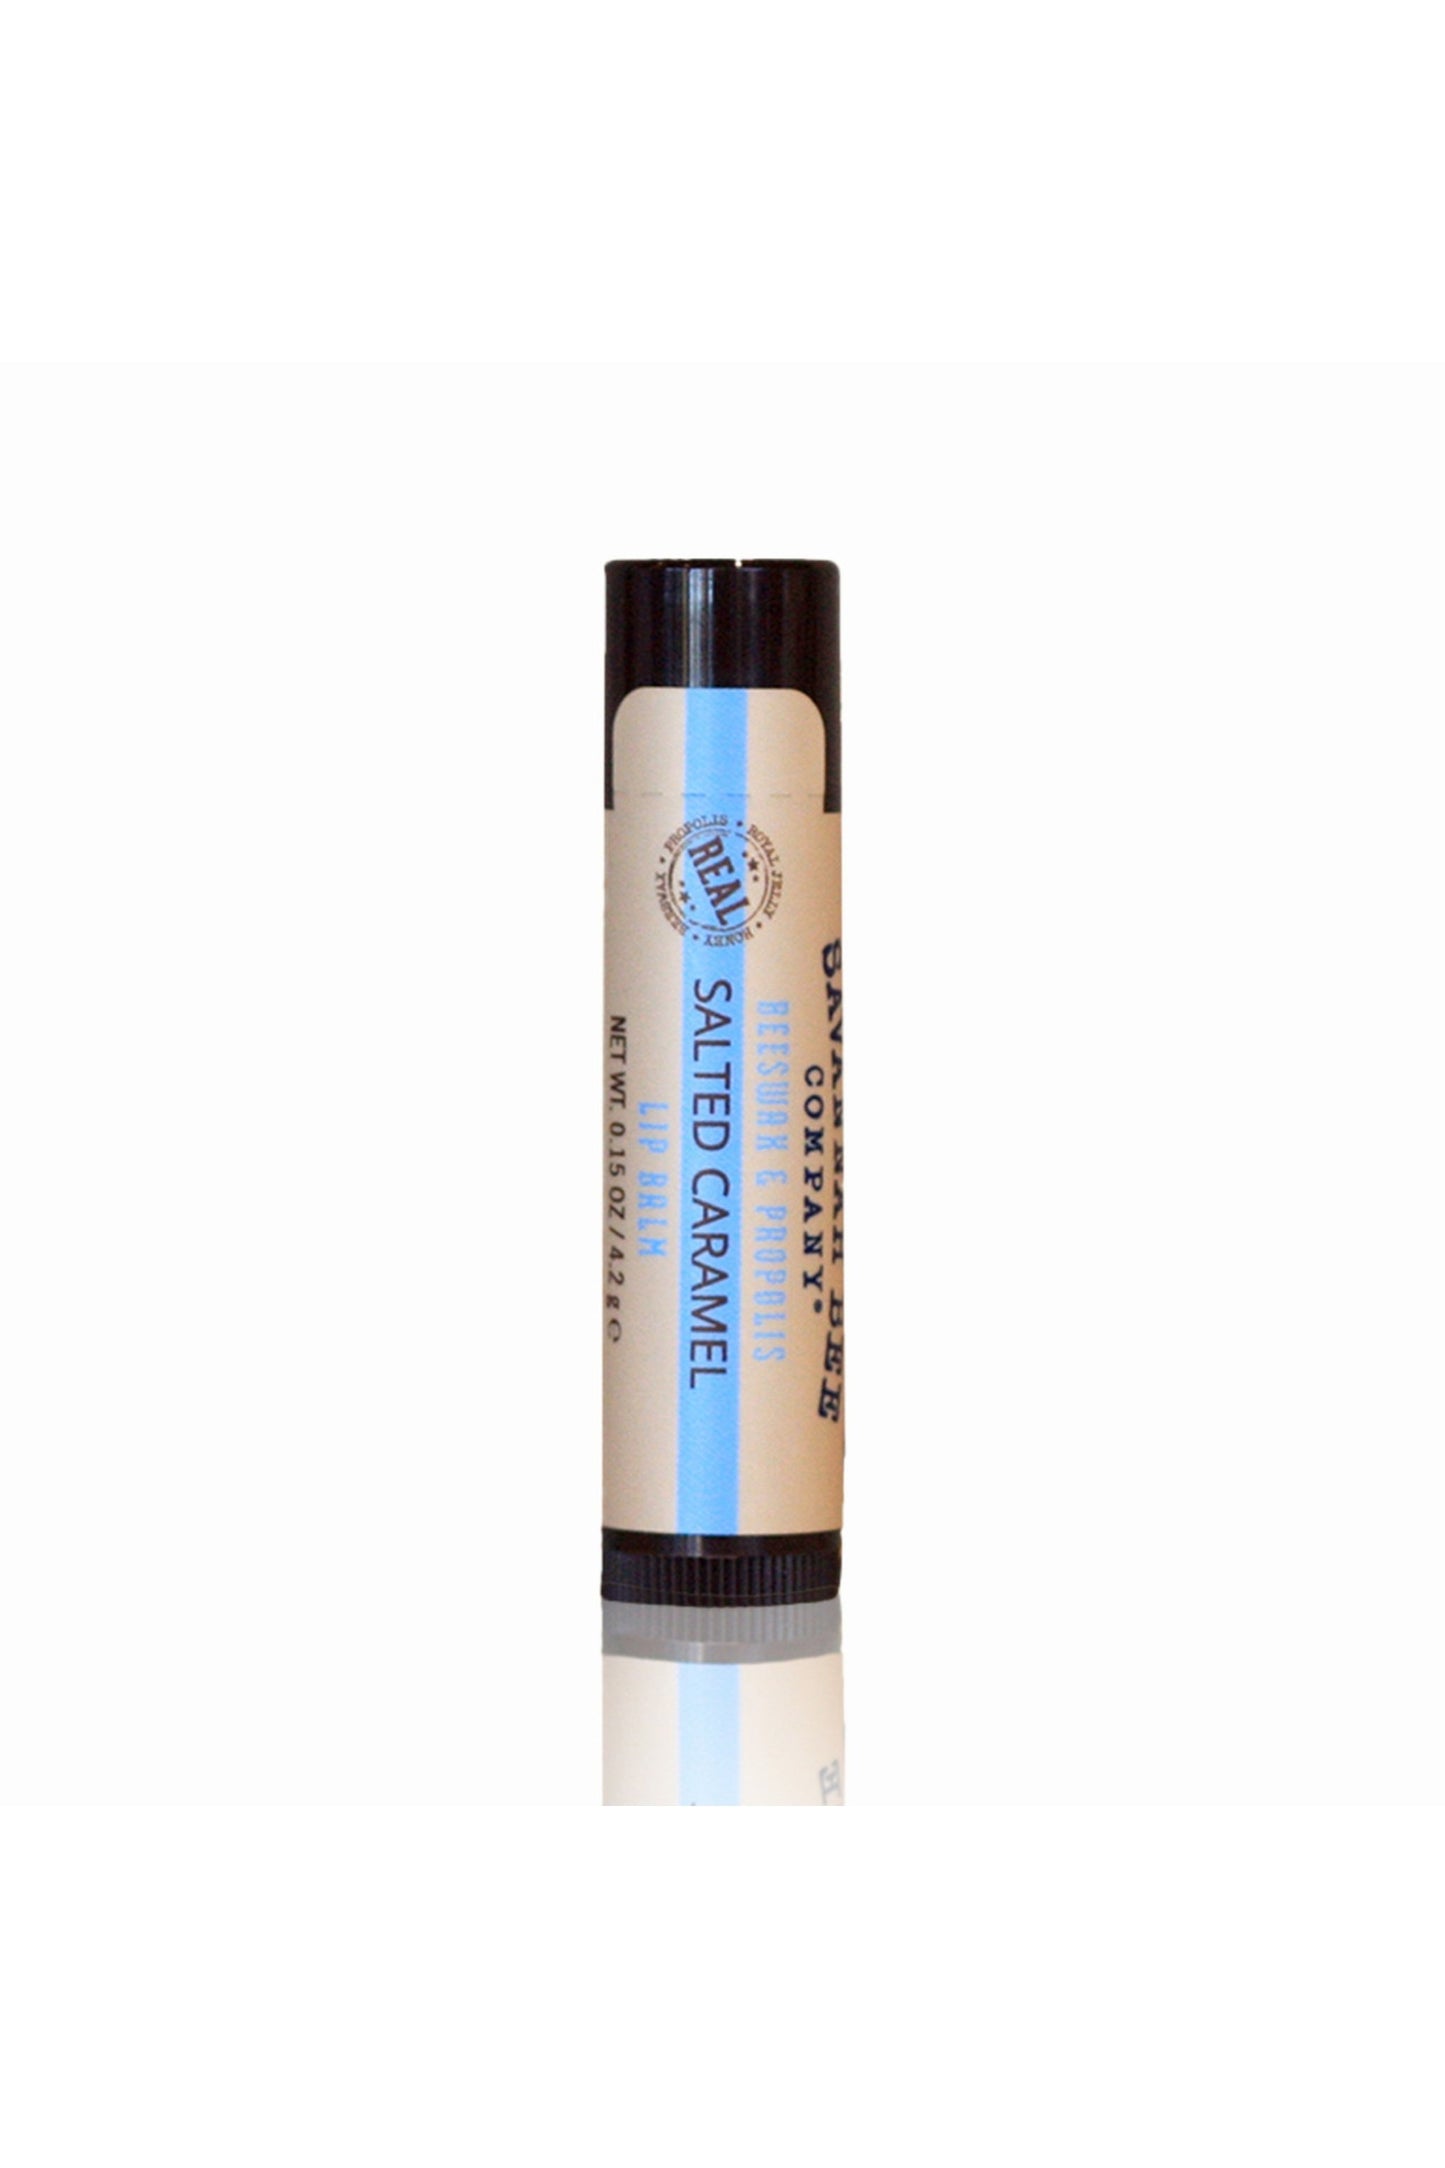 Salted Caramel Beeswax & Propolis Lip Balm blue and cream colored lipstick tube.  